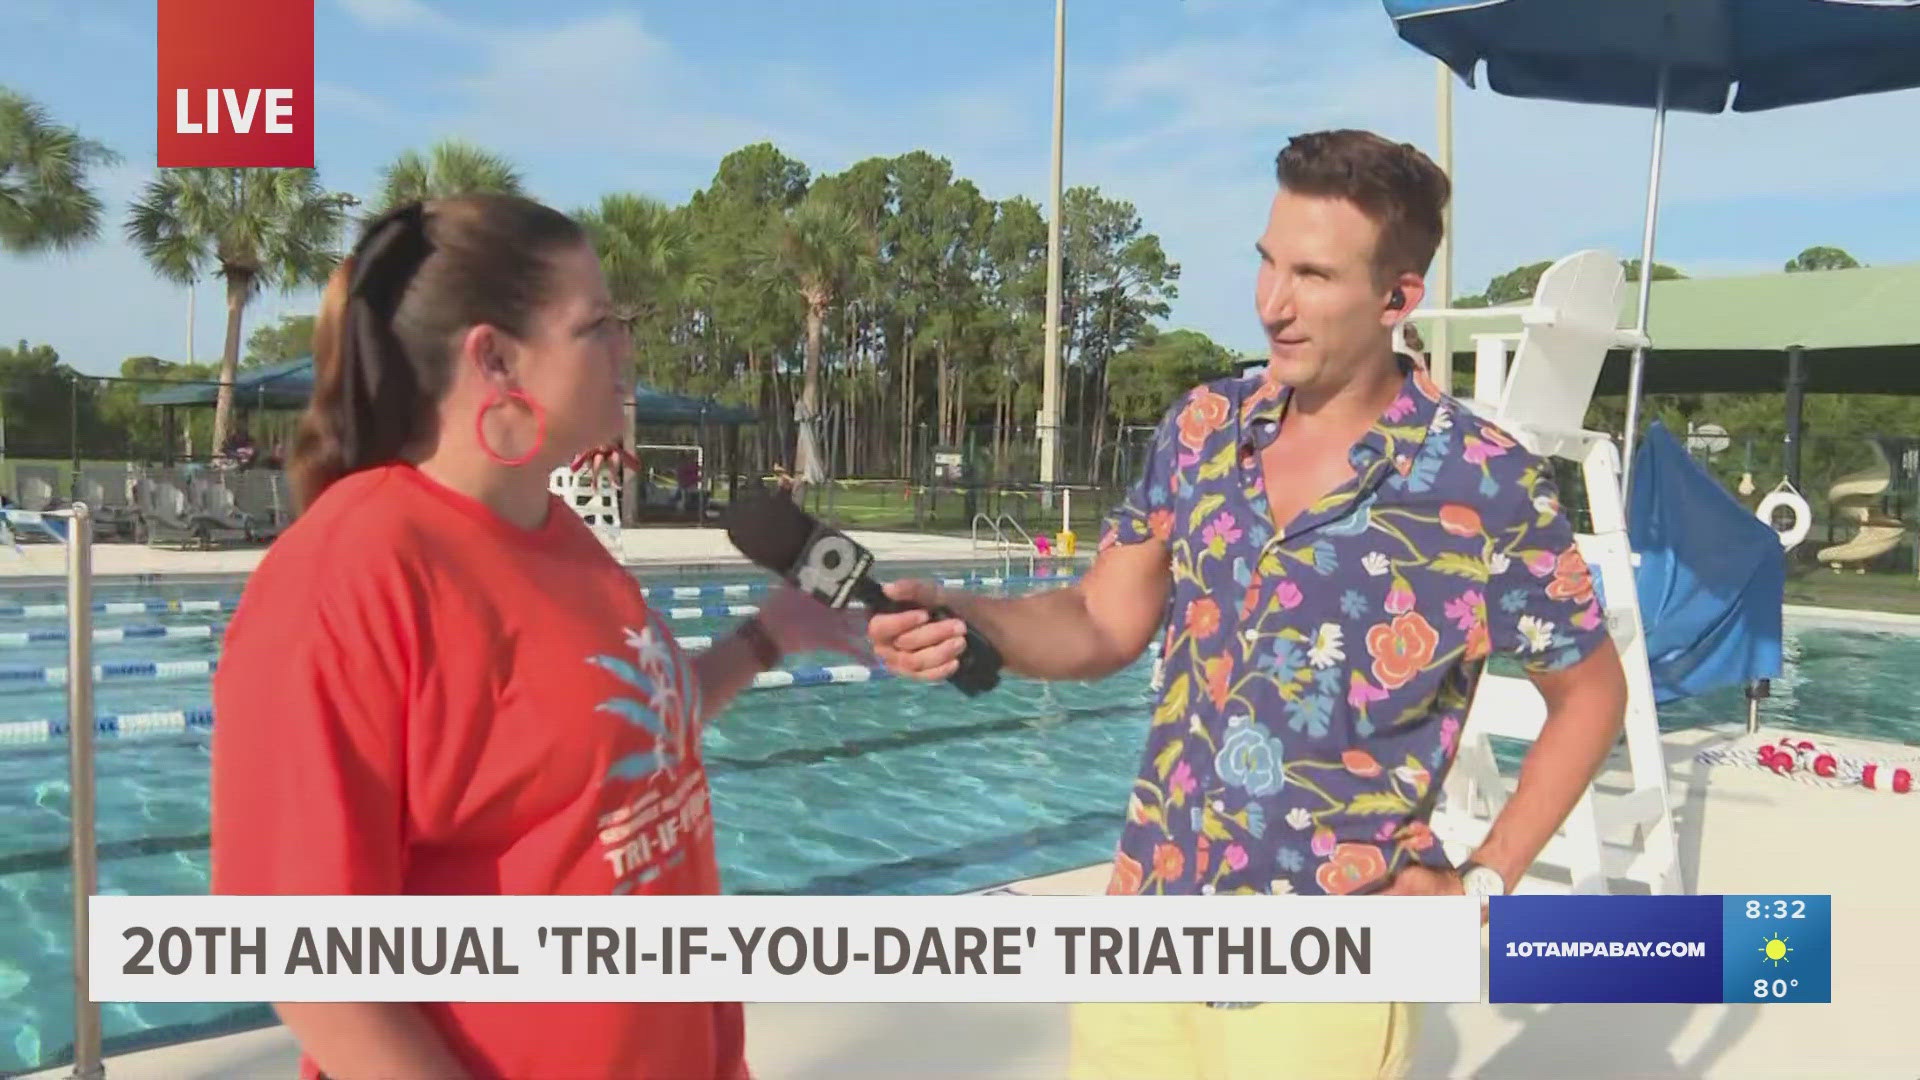 Young athletes around 11 and 12 years old started with running, then biking then swimming in an annual triathlon in Seminole.